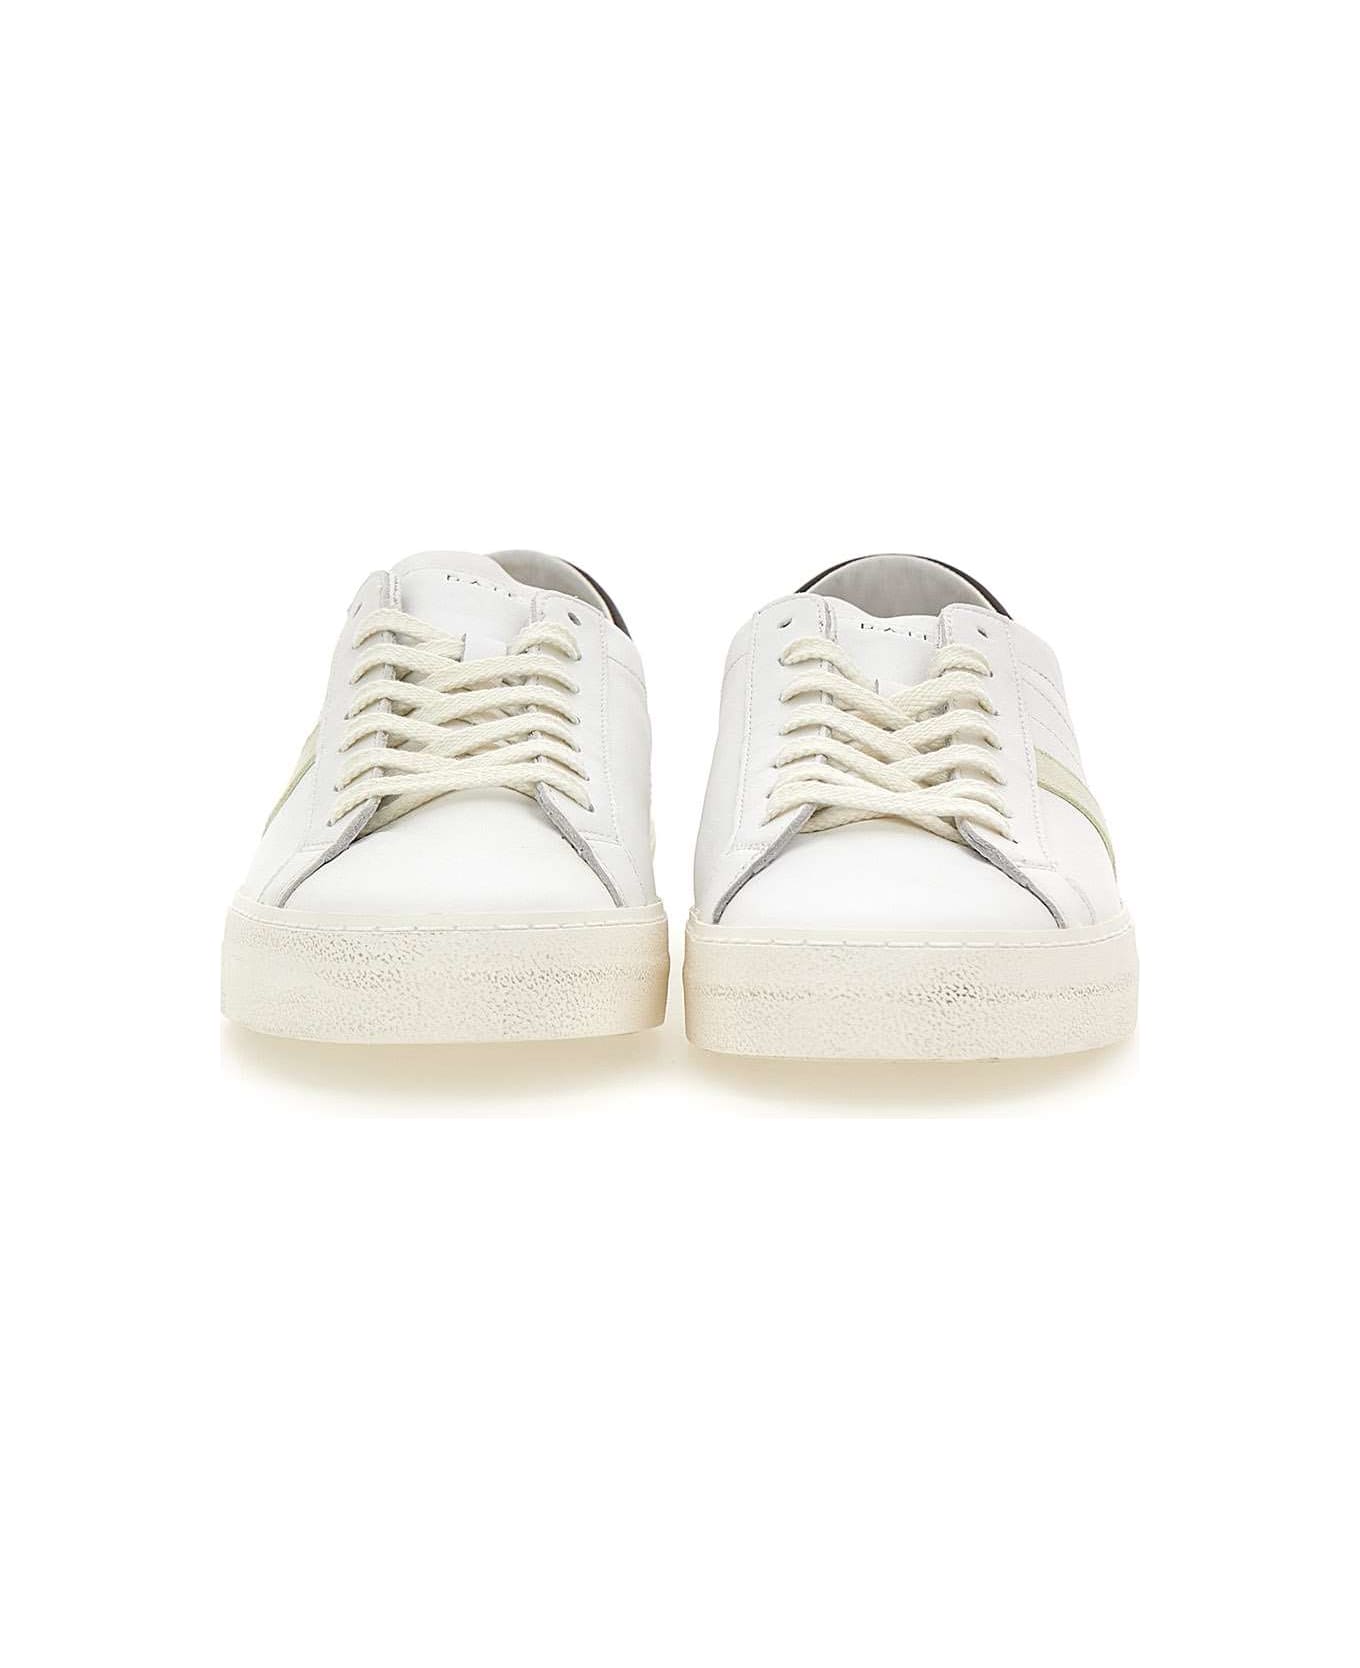 D.A.T.E. "hillow Vintage Calf" Leather Sneakers - WHITE